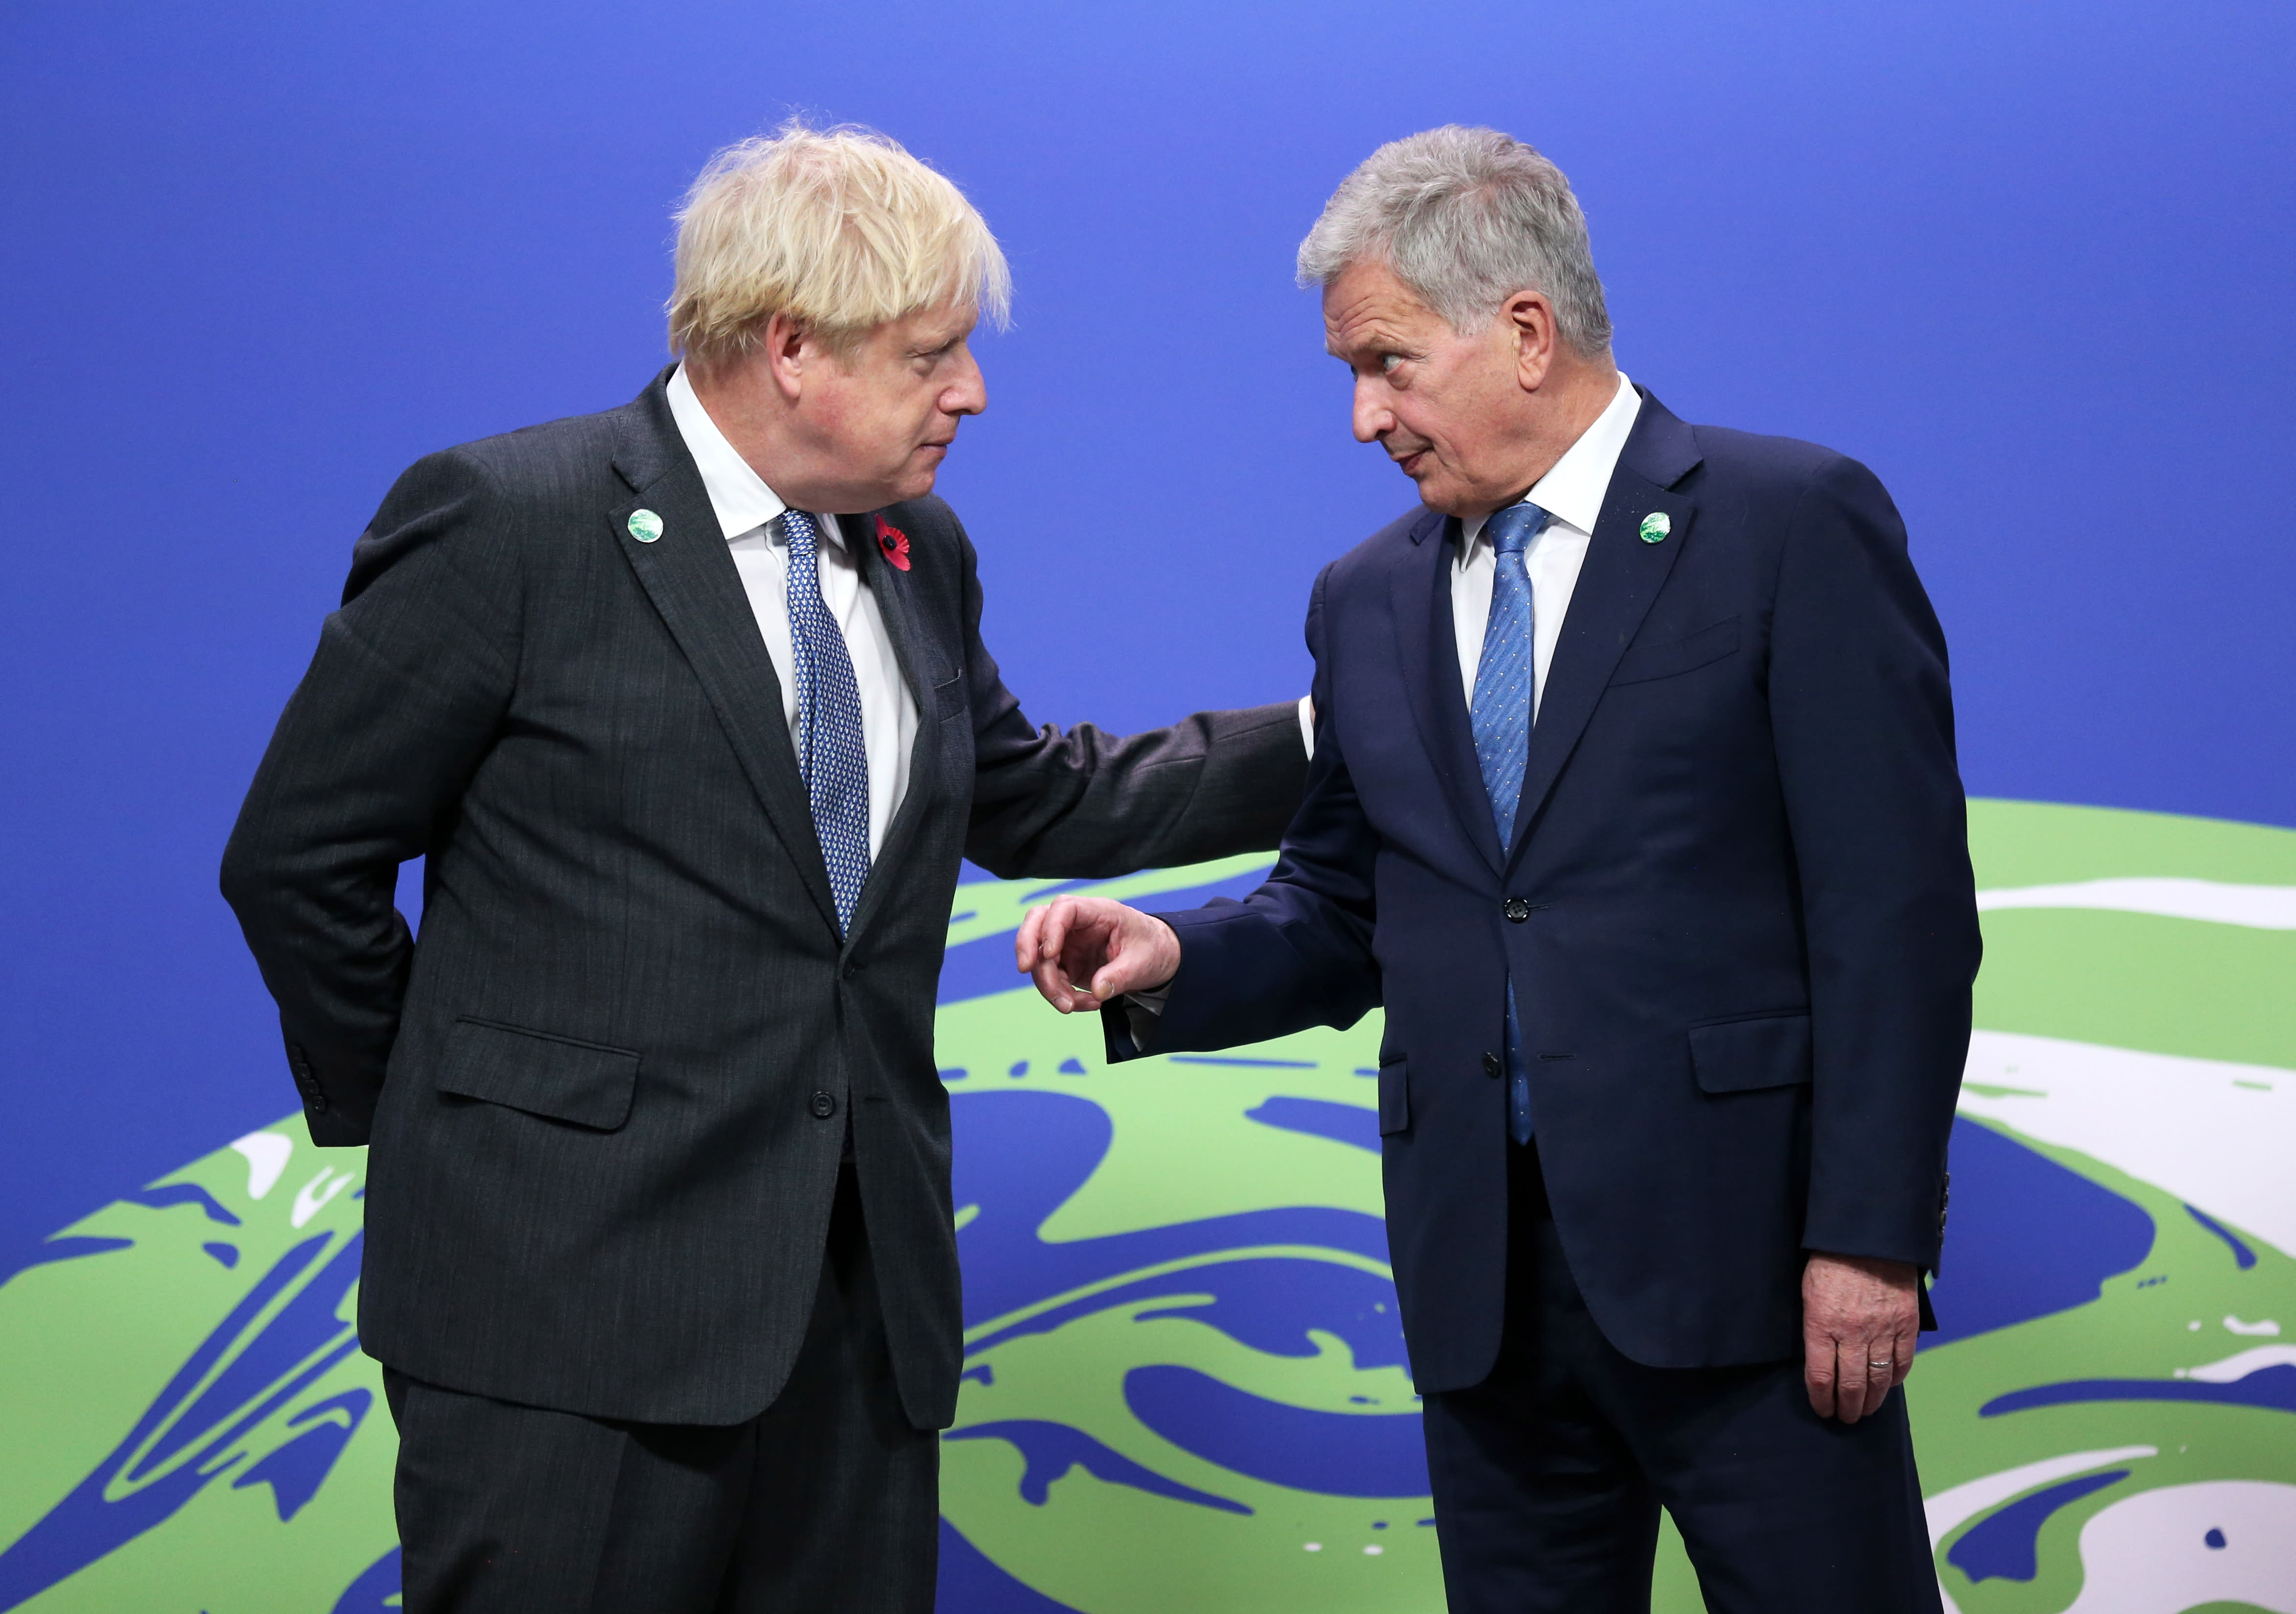 Niinistö discusses defense cooperation with other European leaders Johnson in London